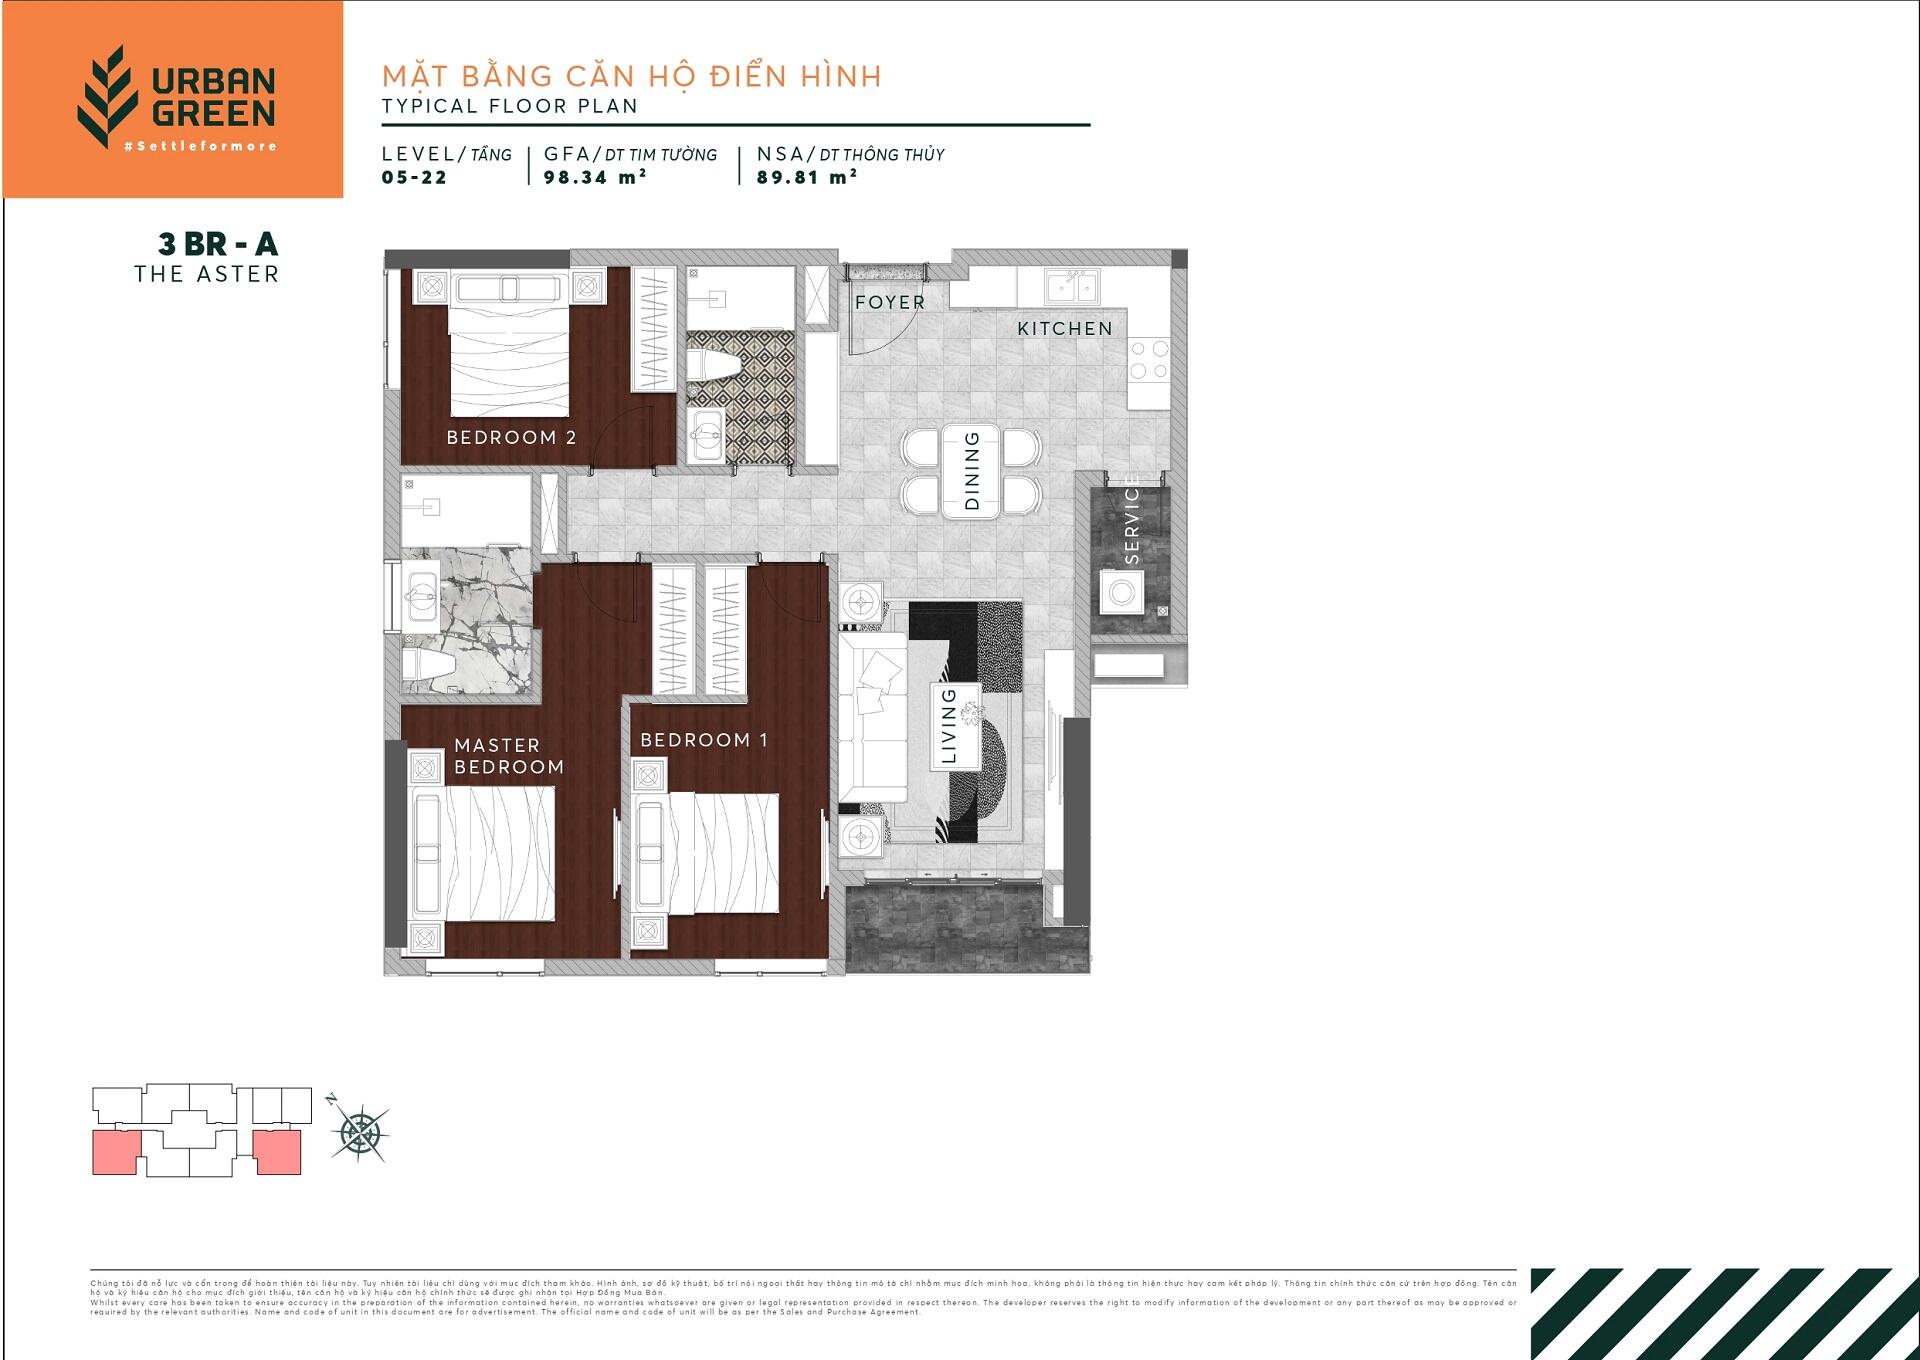 The Aster apartment floor plan 3 bedrooms 3BR - A